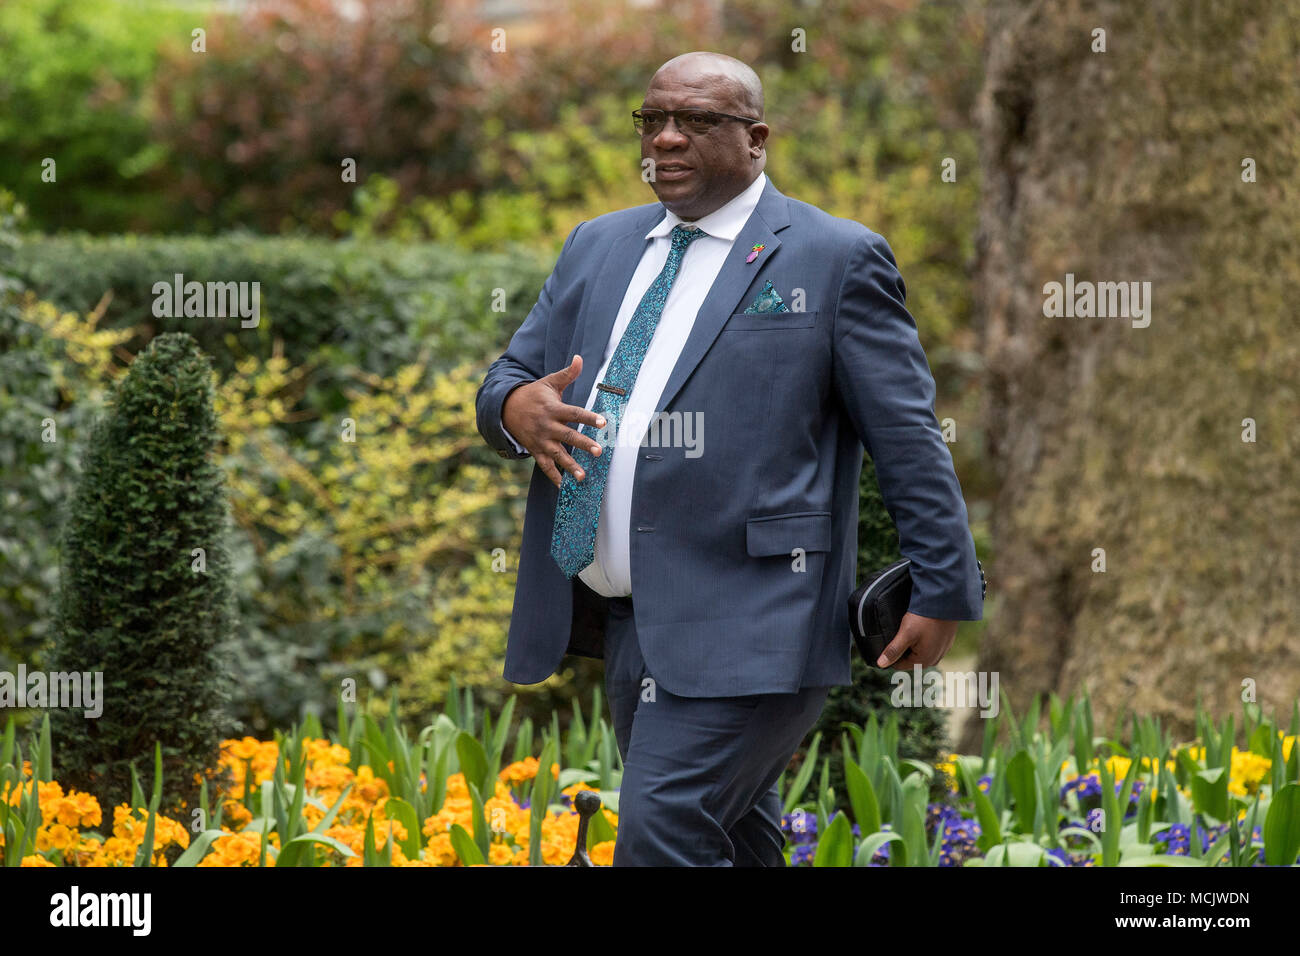 St Kitts and Nevis Prime Minister Timothy Harris arriving in Downing Street ahead of talks with Prime Minister Theresa May, Commonwealth leaders, Foreign Ministers and High Commissioners in relation to the Windrush generation immigration controversy. Stock Photo